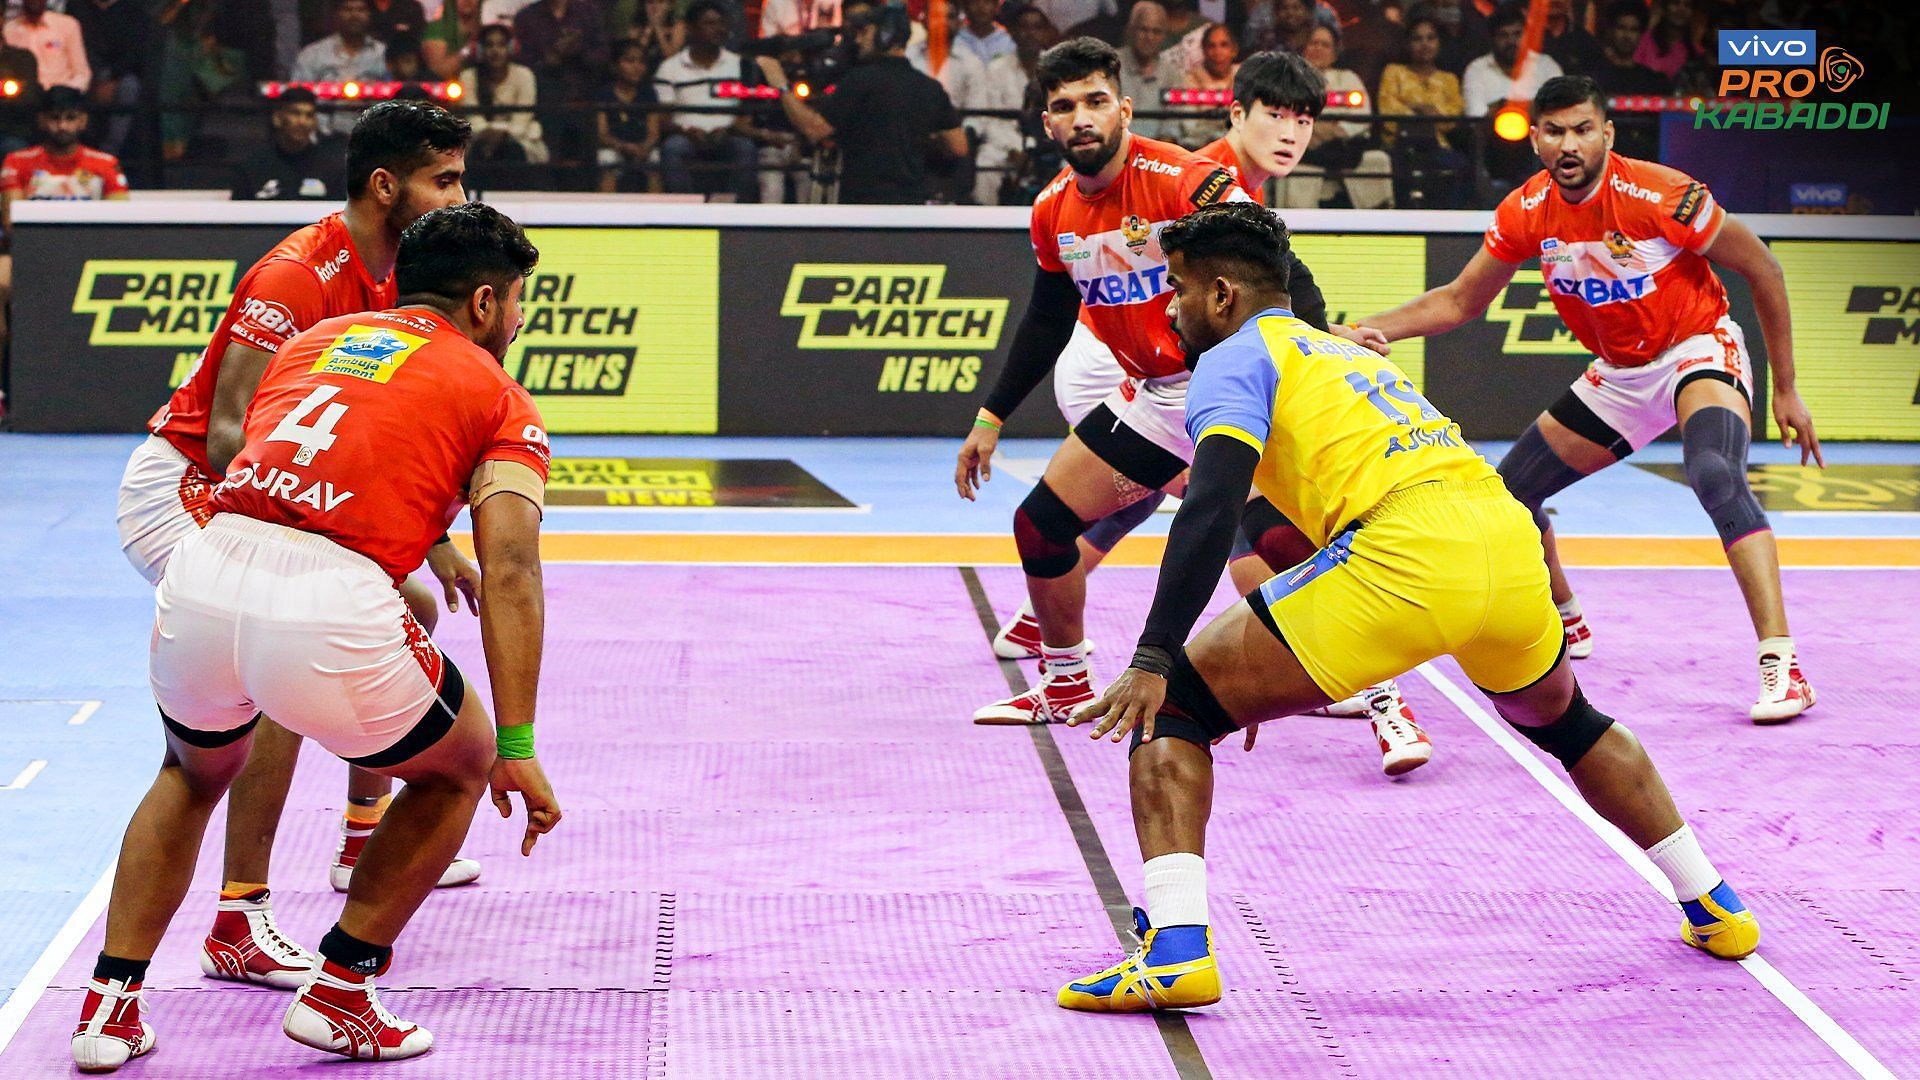 Gujarat Giants lost their last match to Tamil Thalaivas, continuing their run of bad form (Image: Pro Kabaddi on Twitter)